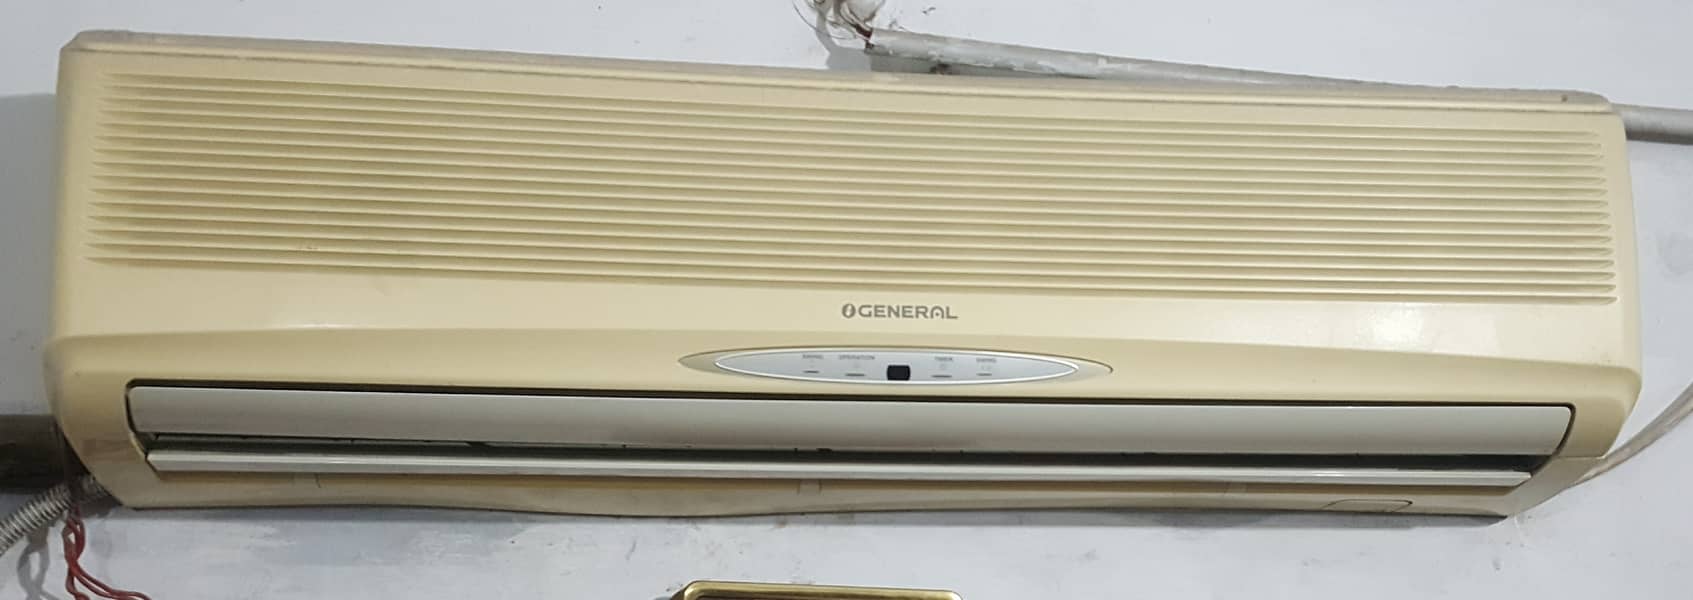 General Ac 1.5 ton For Sale 1